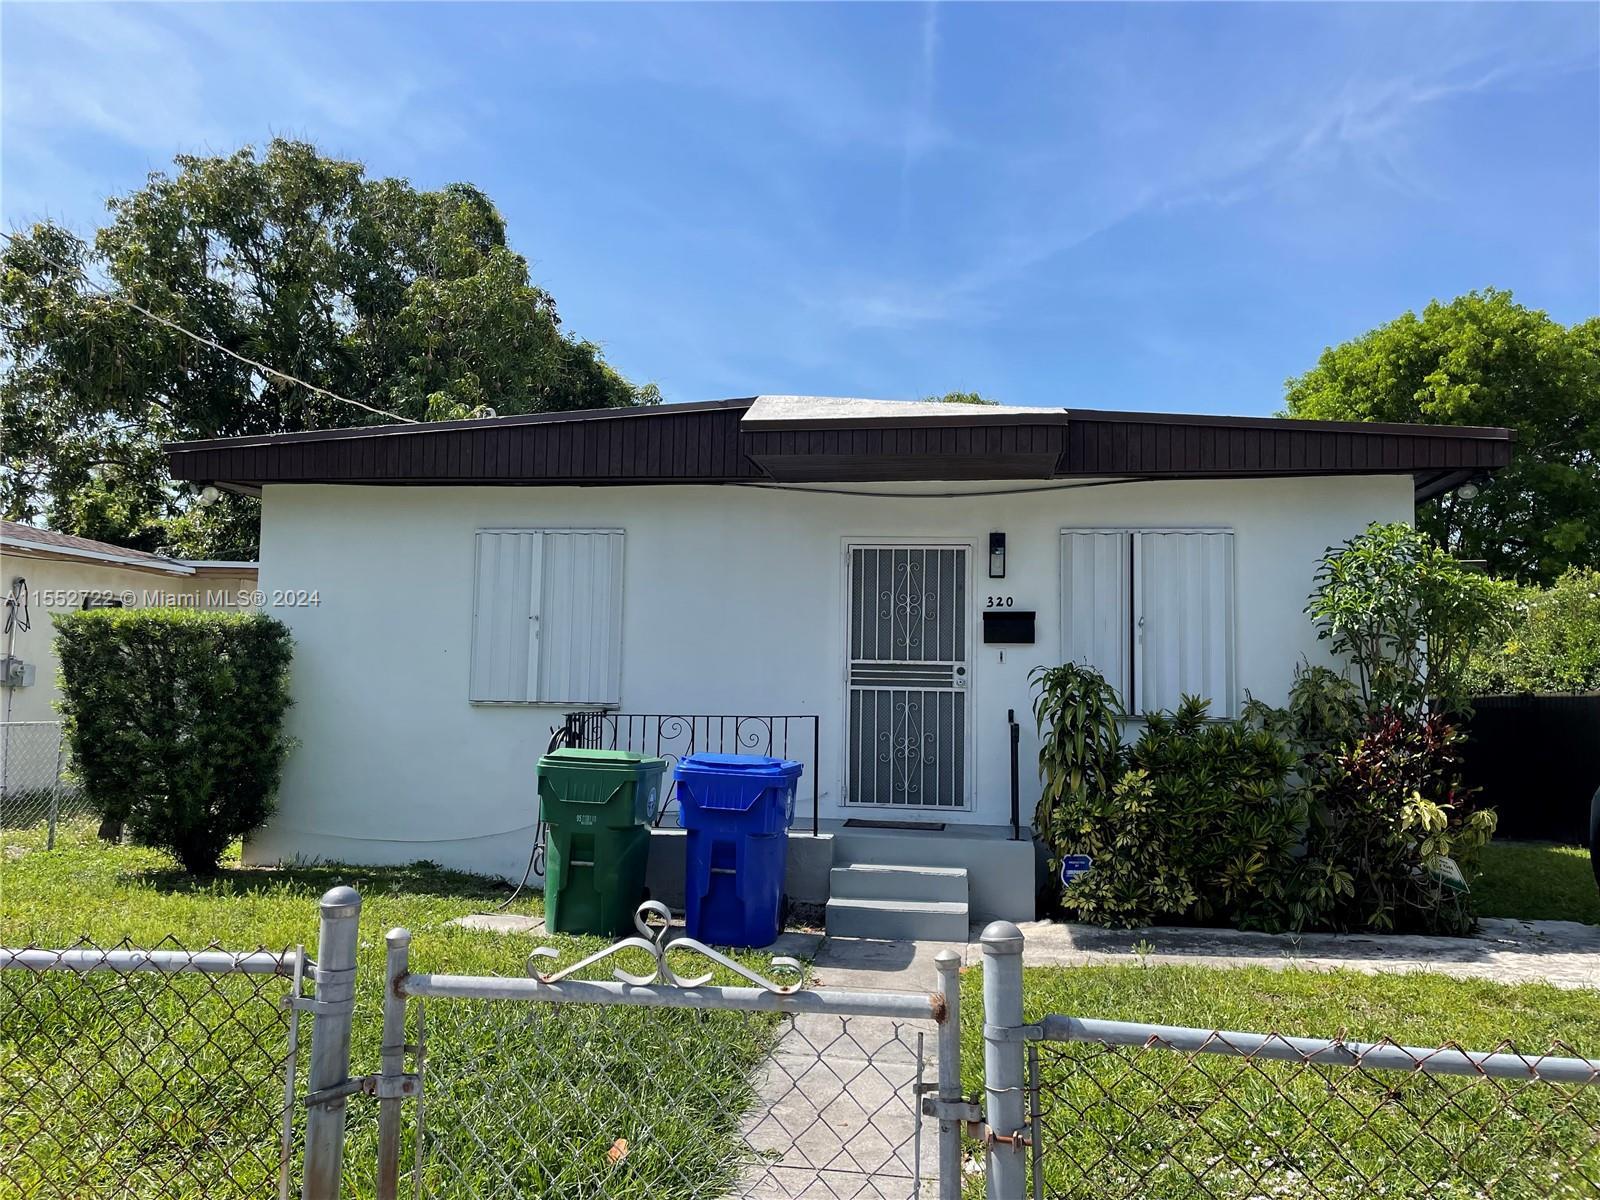 Photo of 320 NW 44th St in Miami, FL